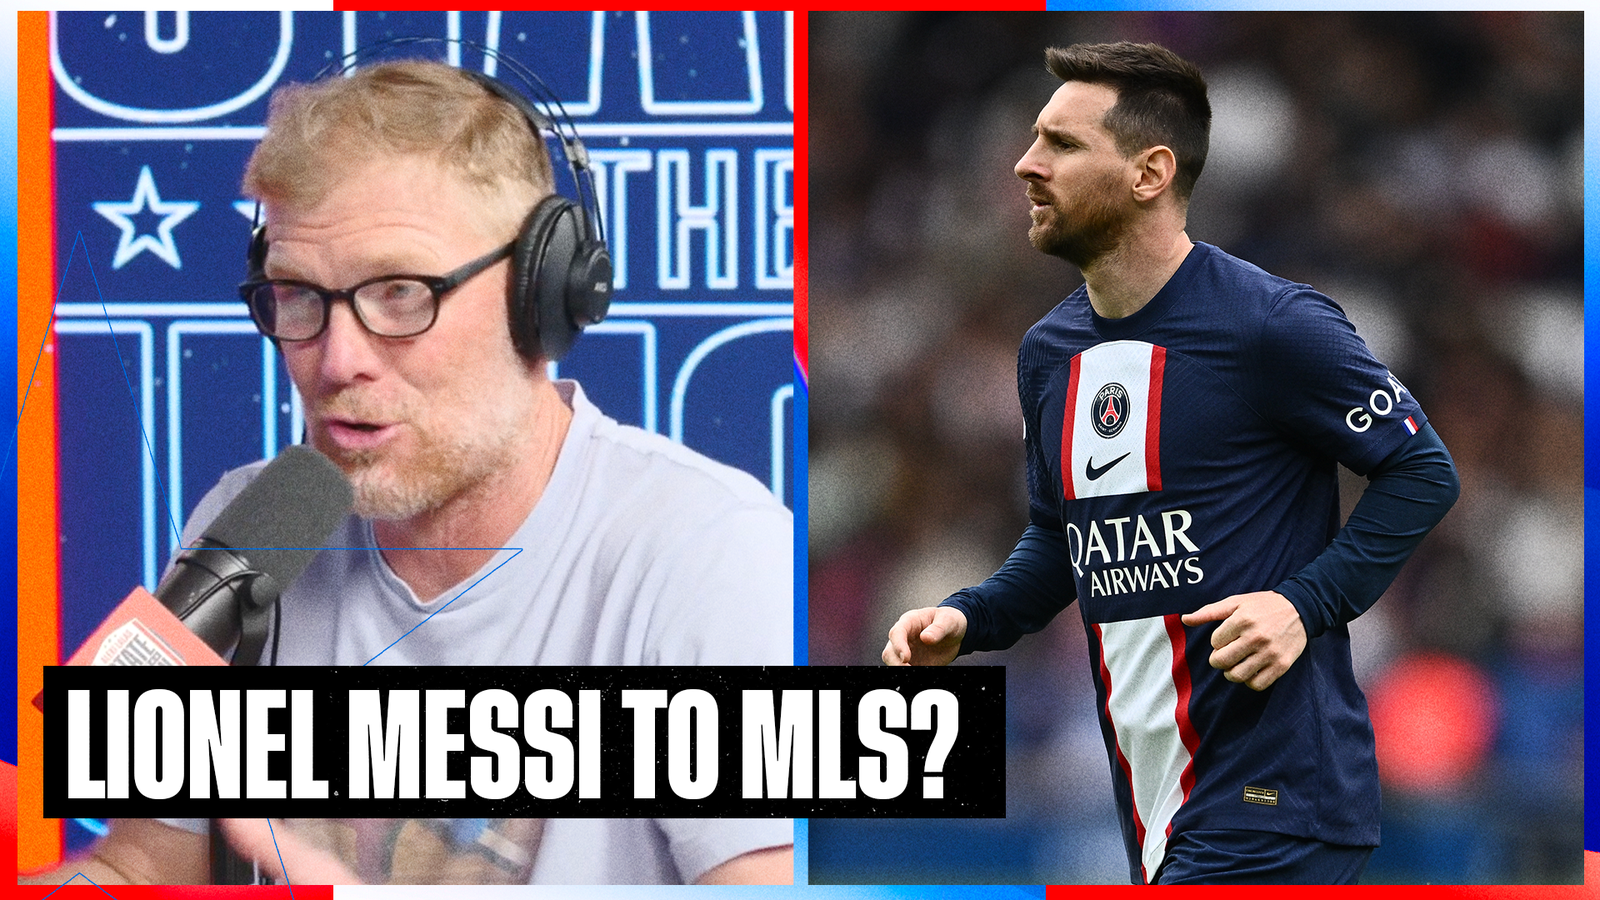 Has MLS earned enough credibility to attract Lionel Messi?